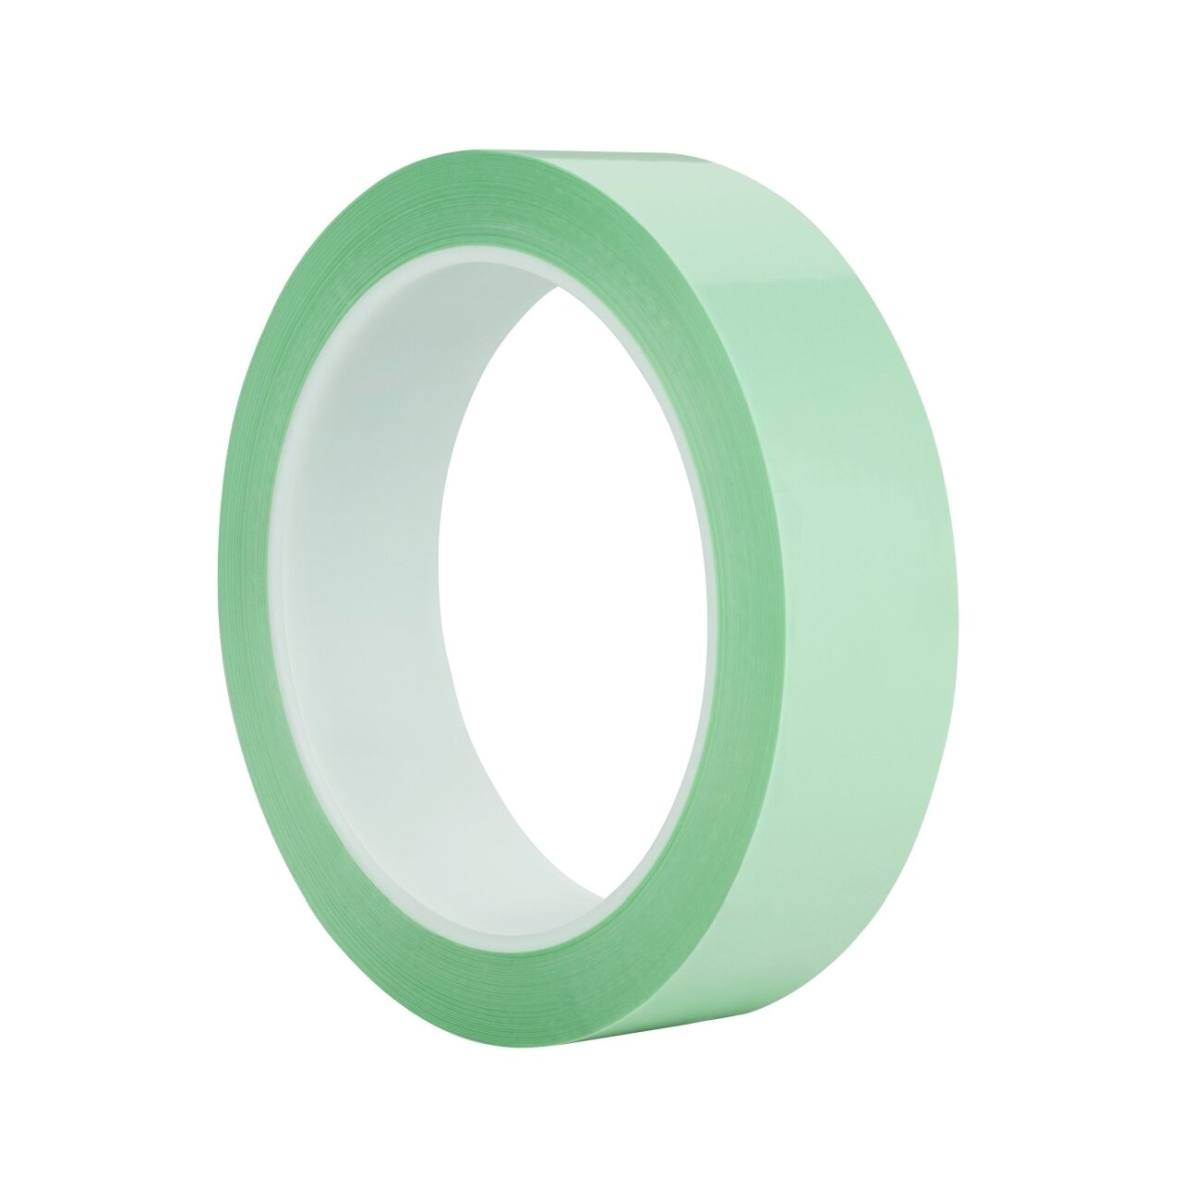 3M polyester adhesive tape 875, green, 25 mm x 66 m, 0.05 mm